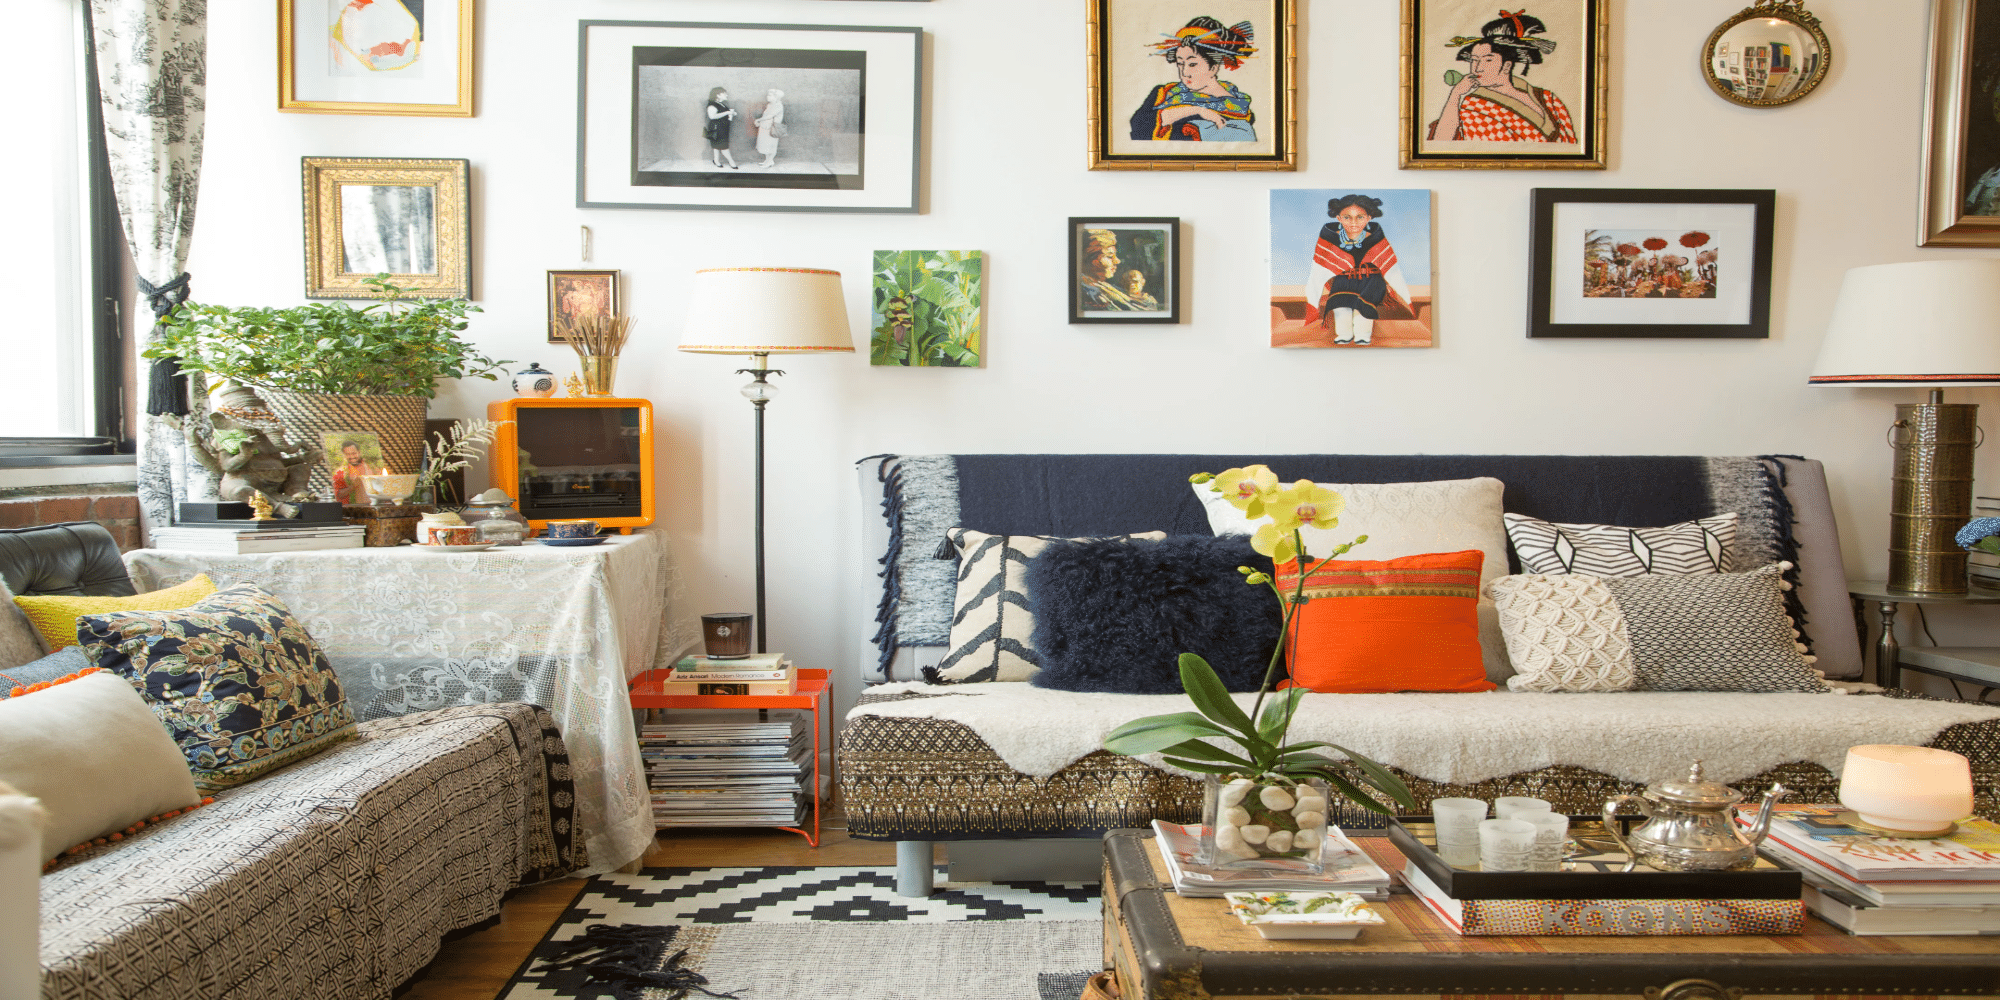 How to Match a Boho Coffee Table with Other Furniture